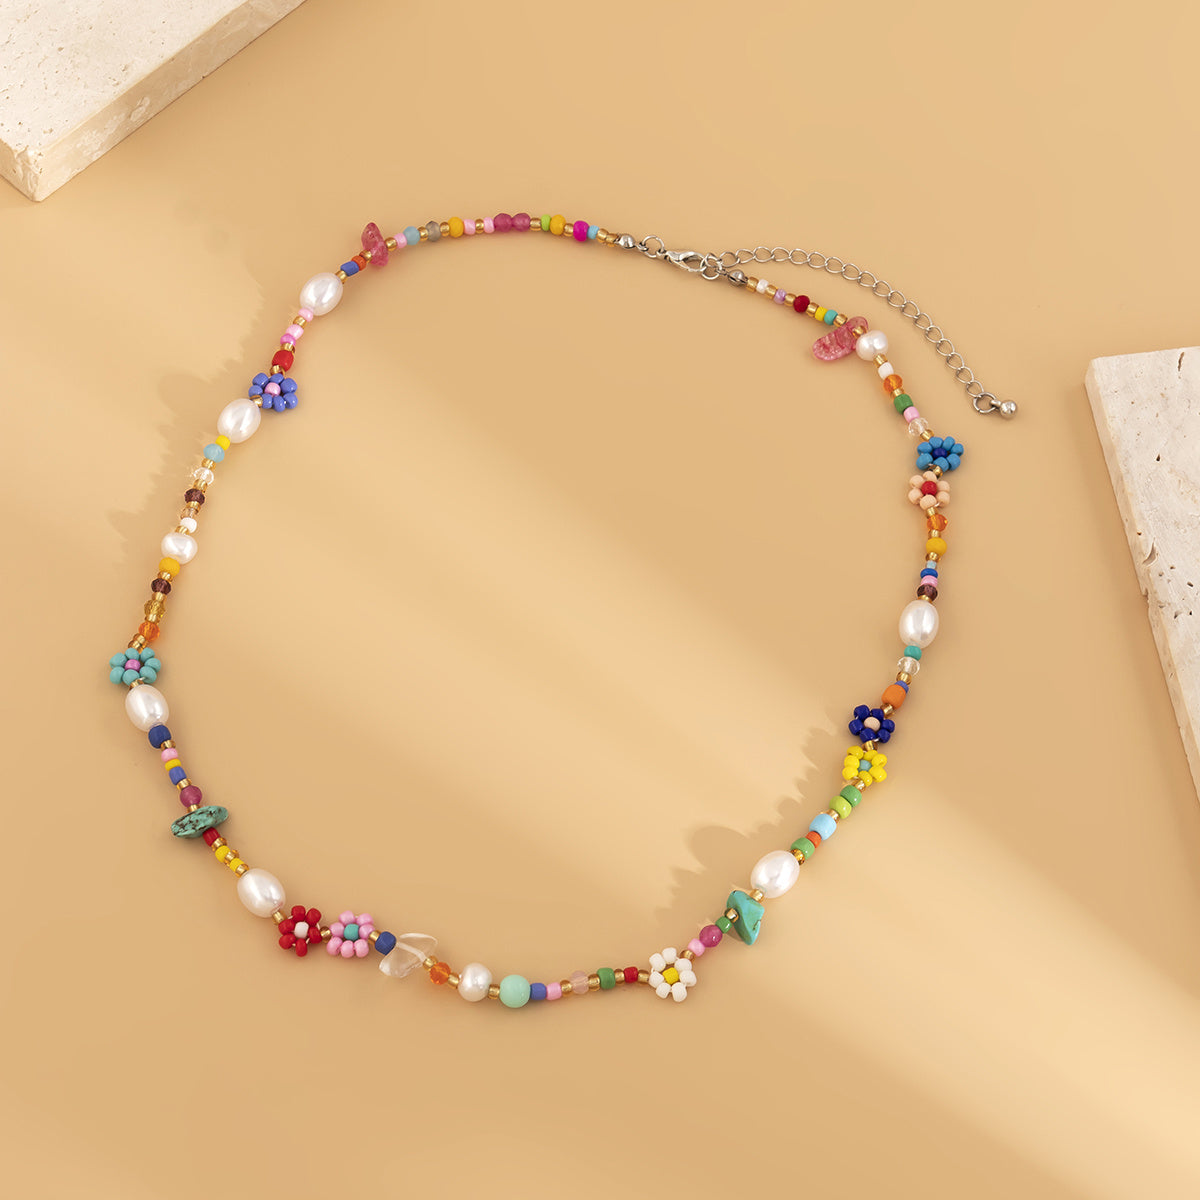 Gorgeous Floral Flower Choker Necklace - Colorful Rice Beads Holiday Jewelry for Women & Girls